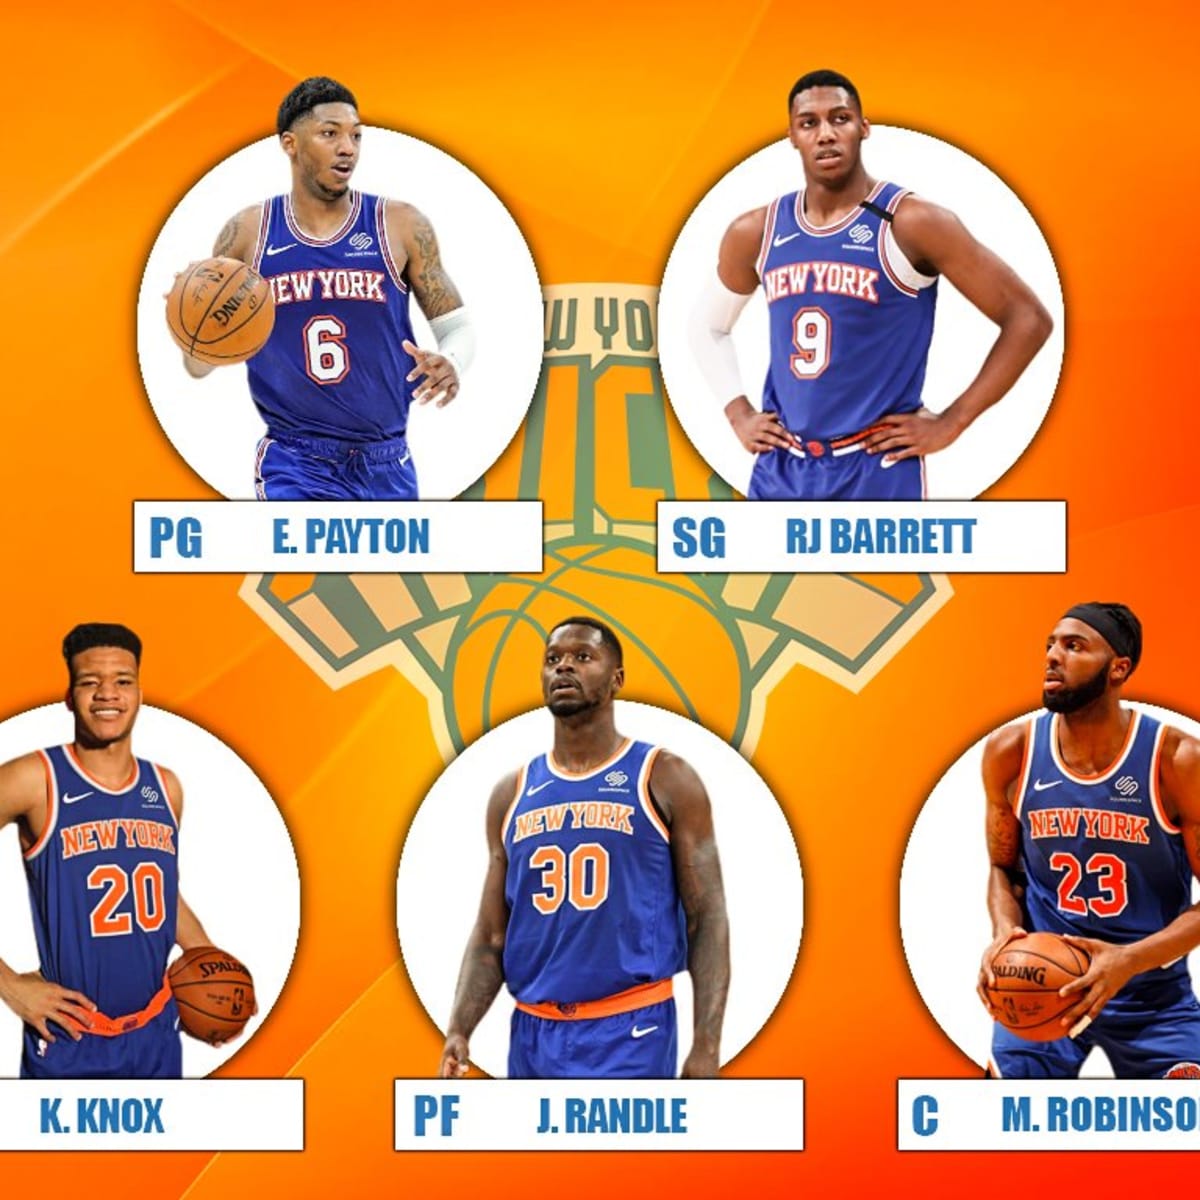 New York Knicks All-Time Team: A look at the full roster